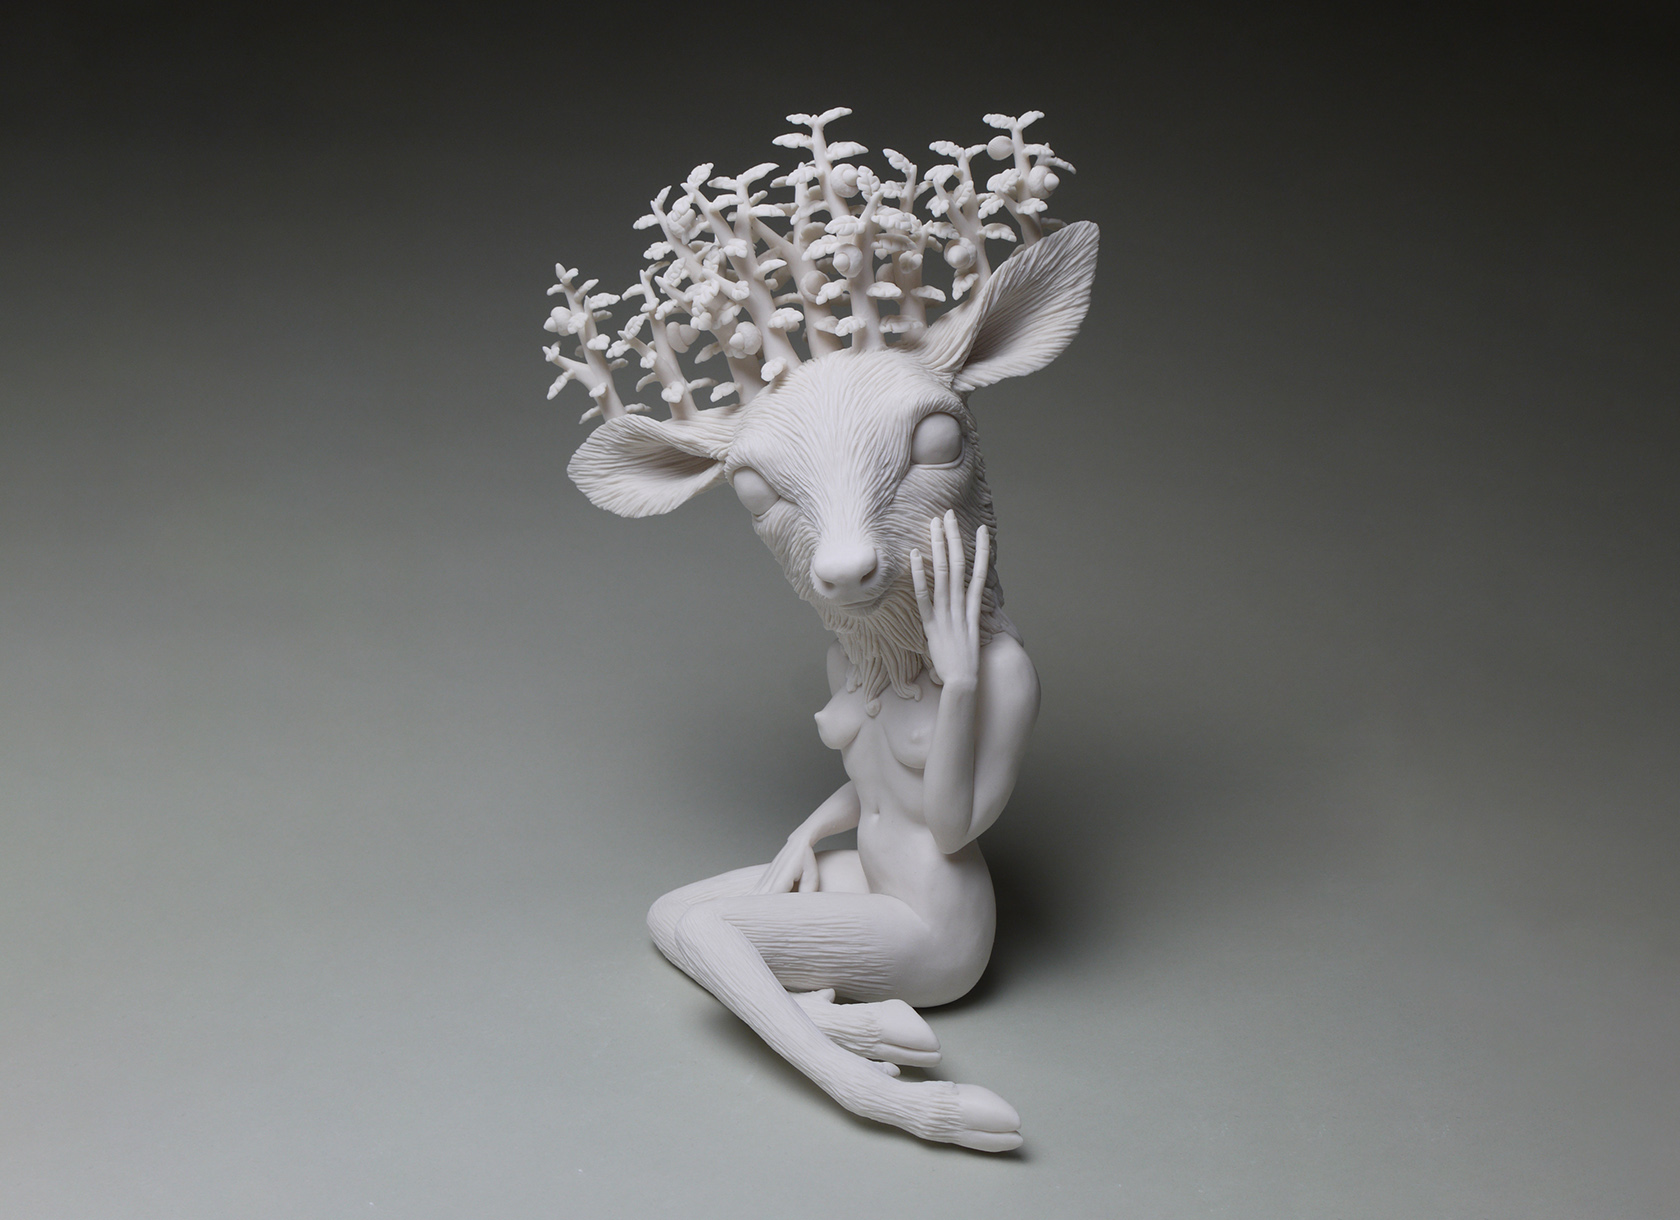 Ceramic statue of a fawn with trees for horns and the body of a human female.